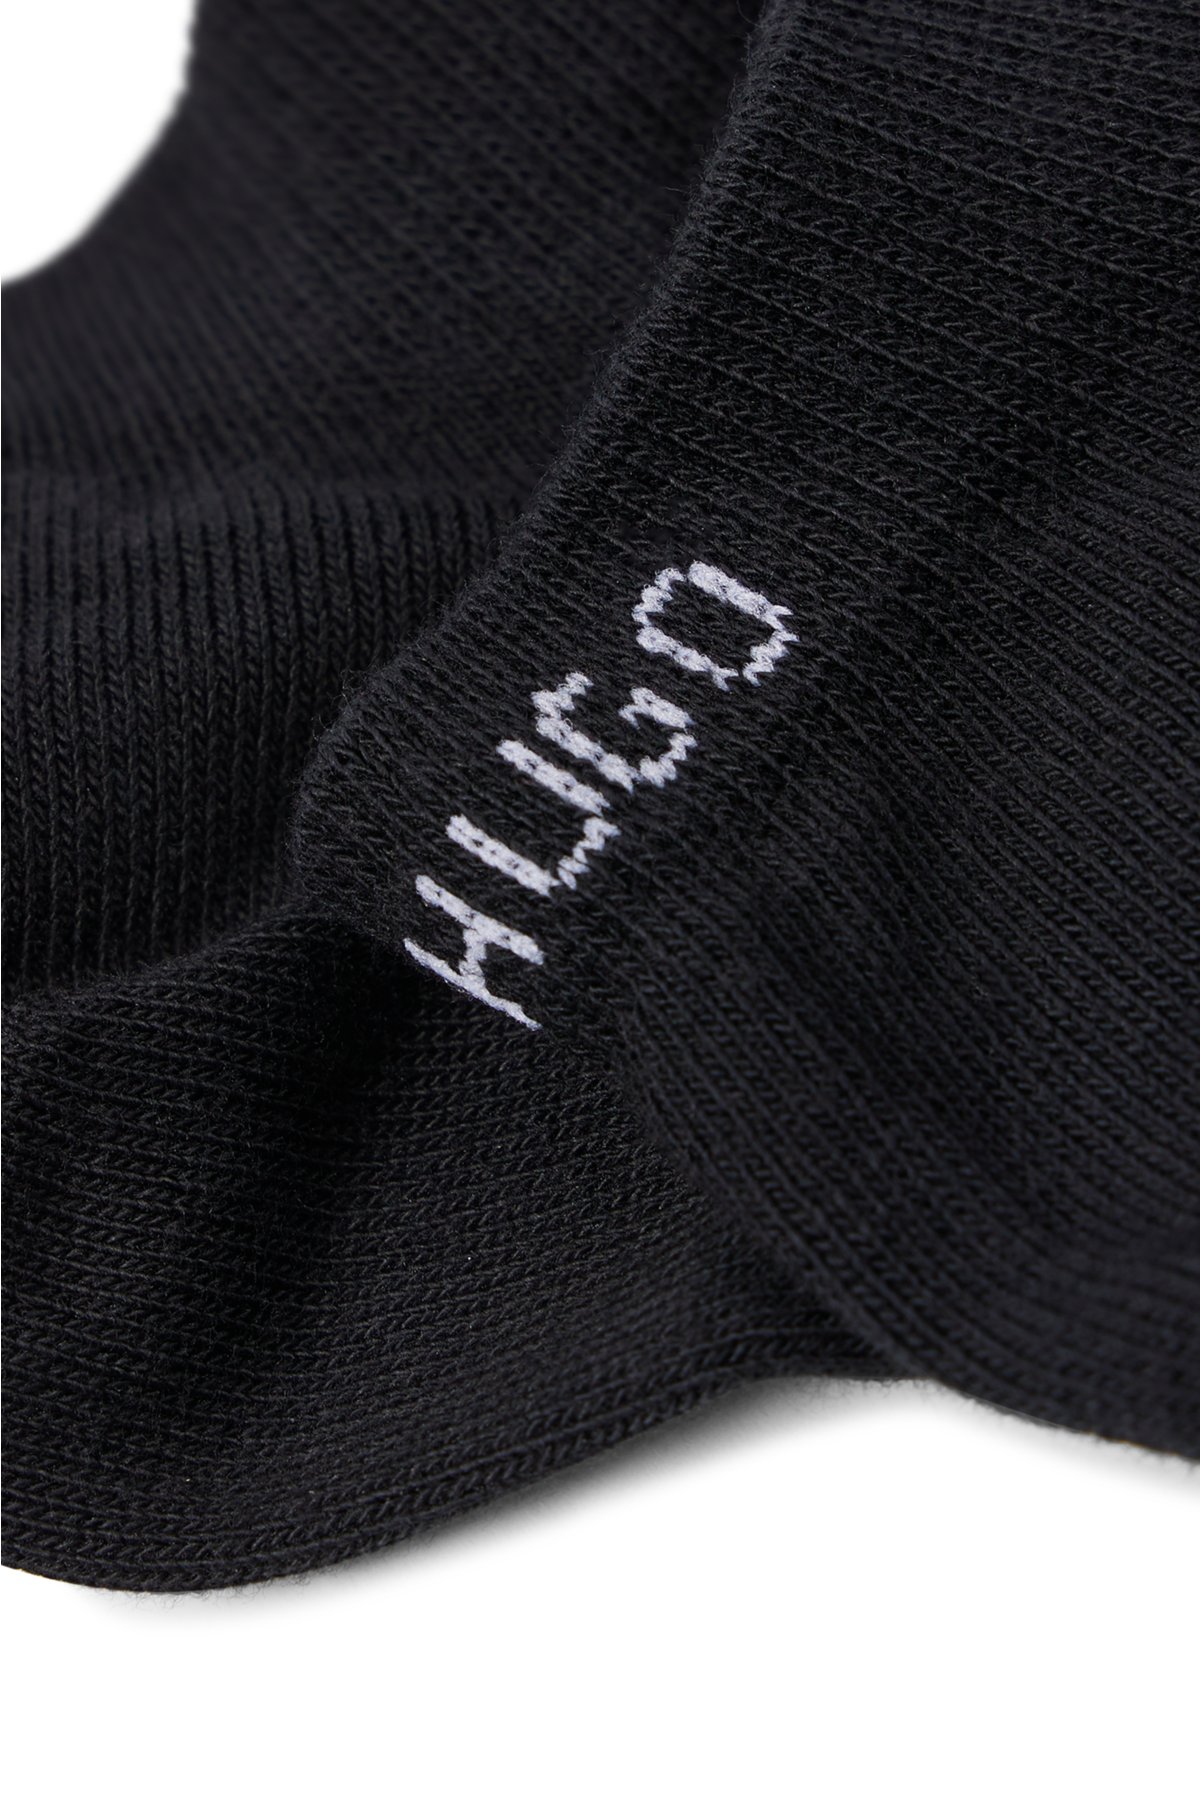 Six-pack of socks in a cotton blend, Black